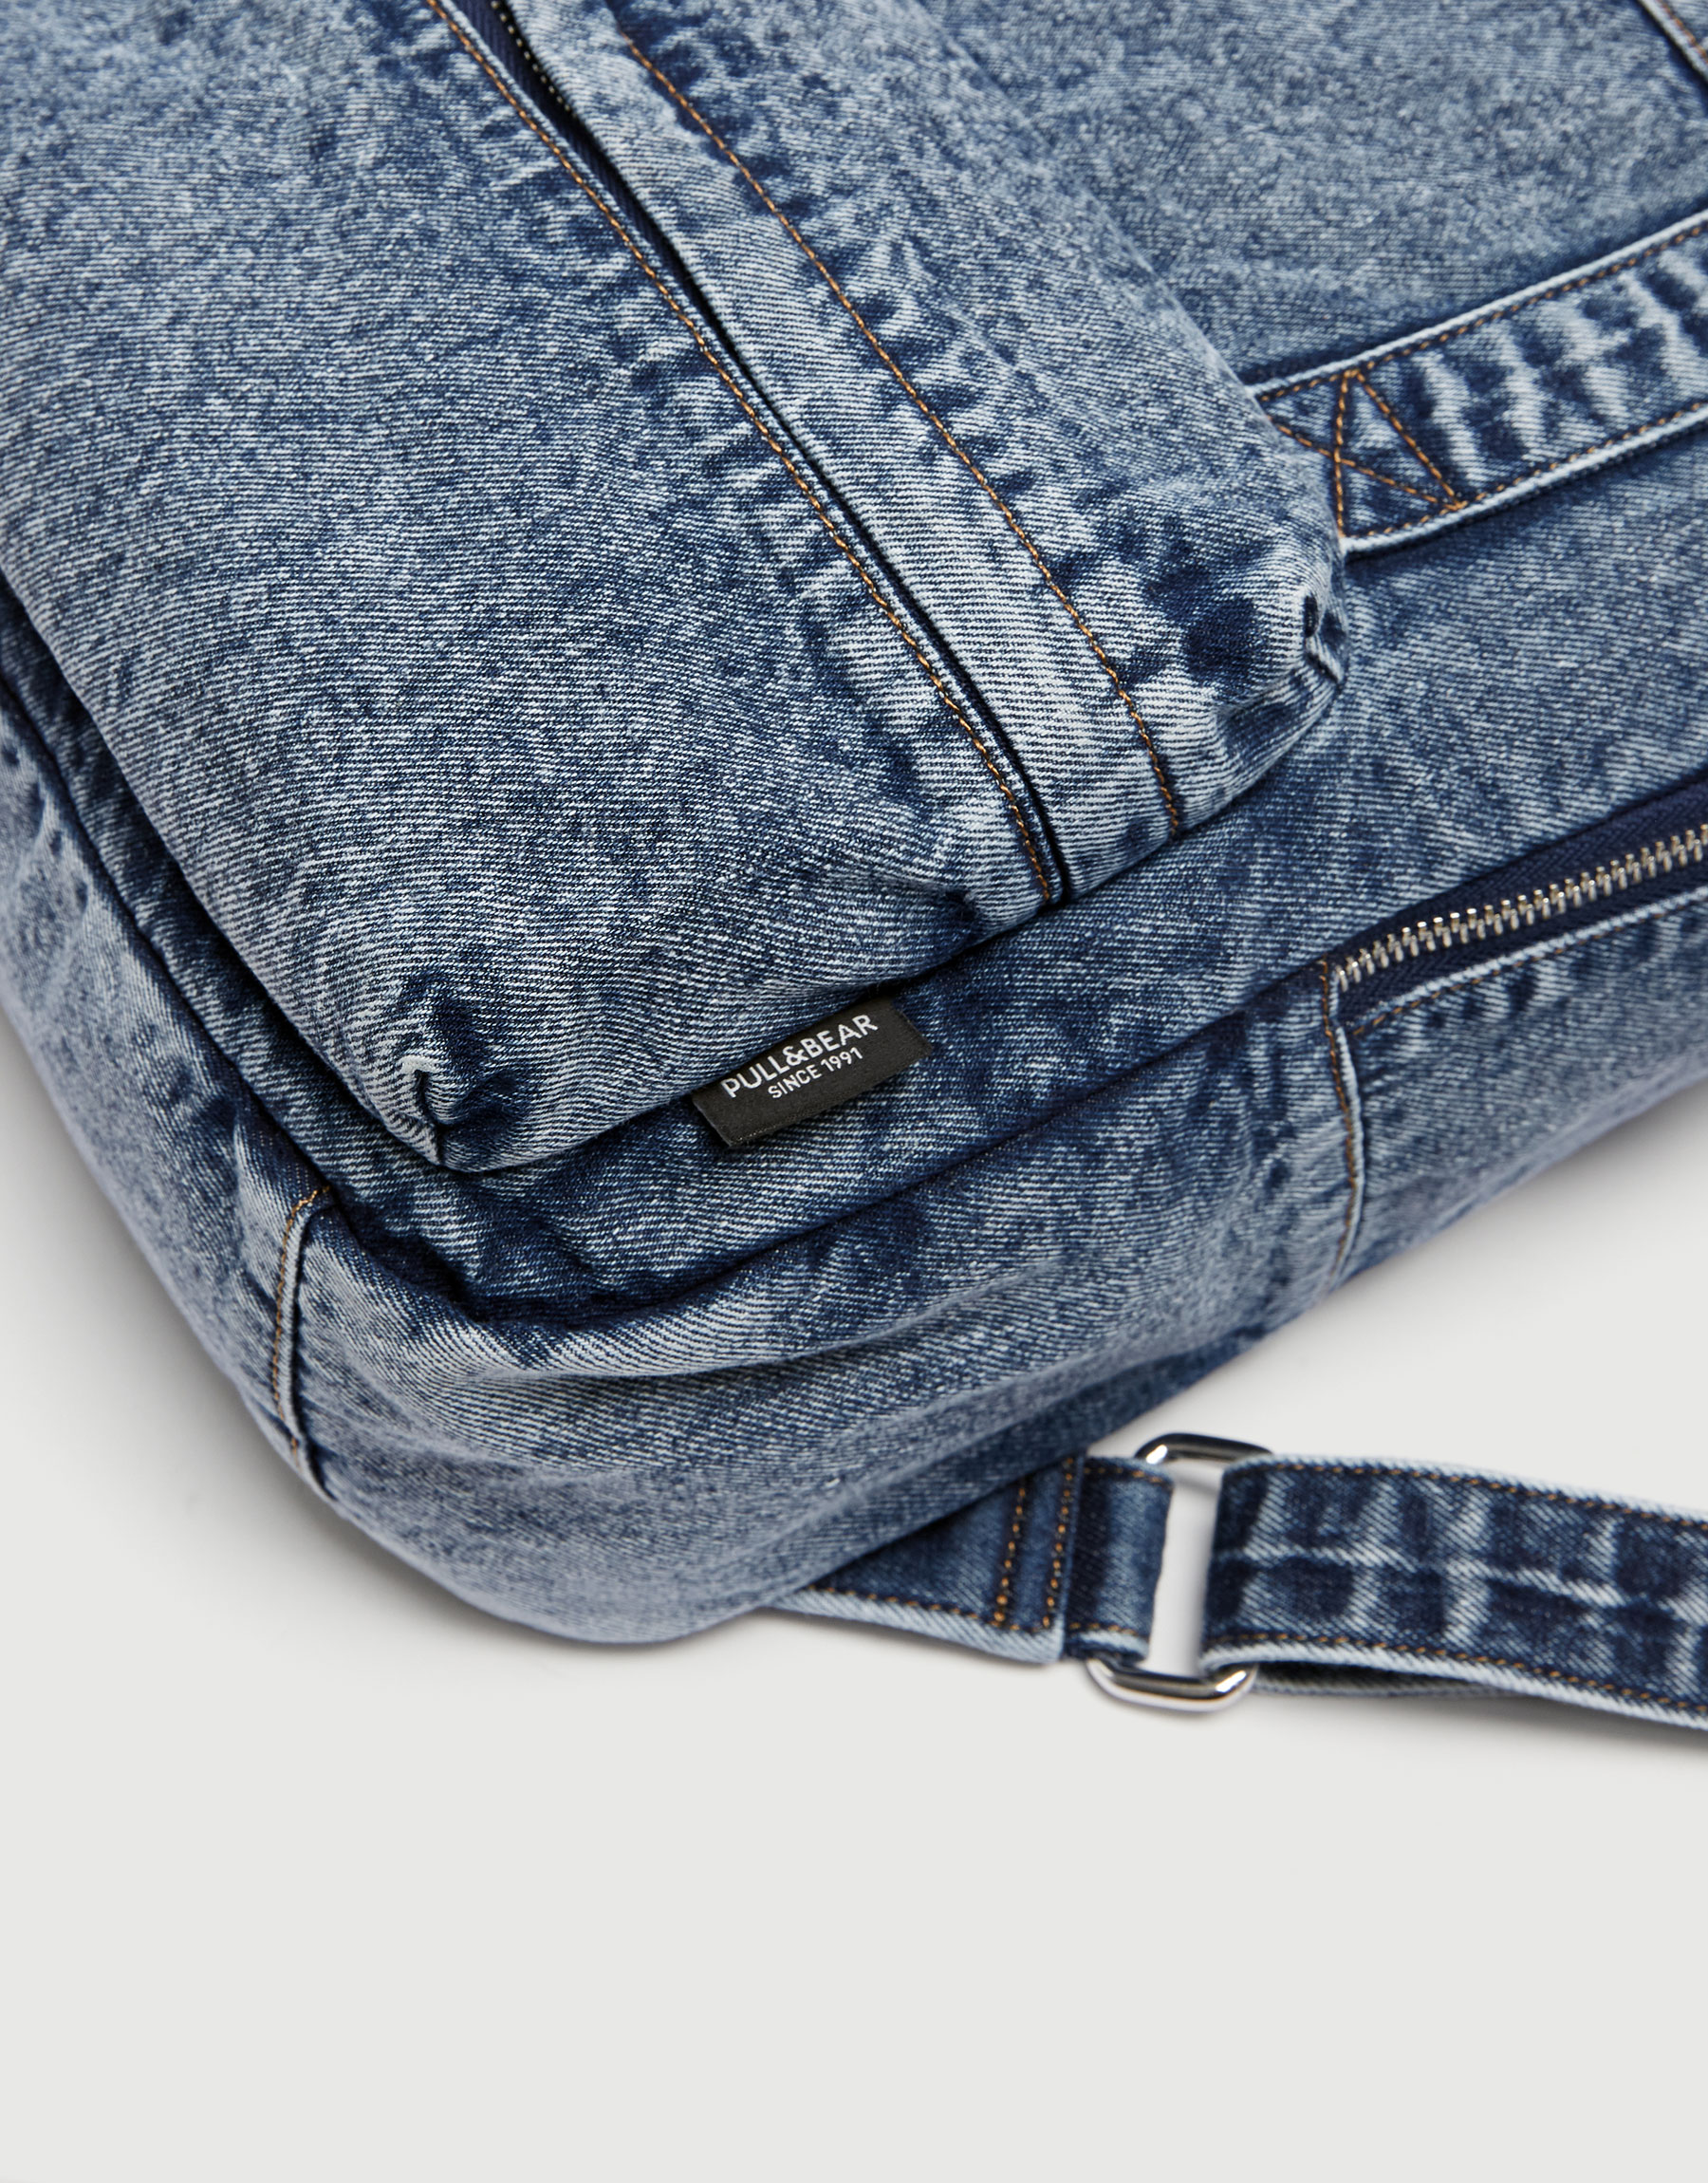 Great selection at great prices Sac à dos denim - pull&bear, denim